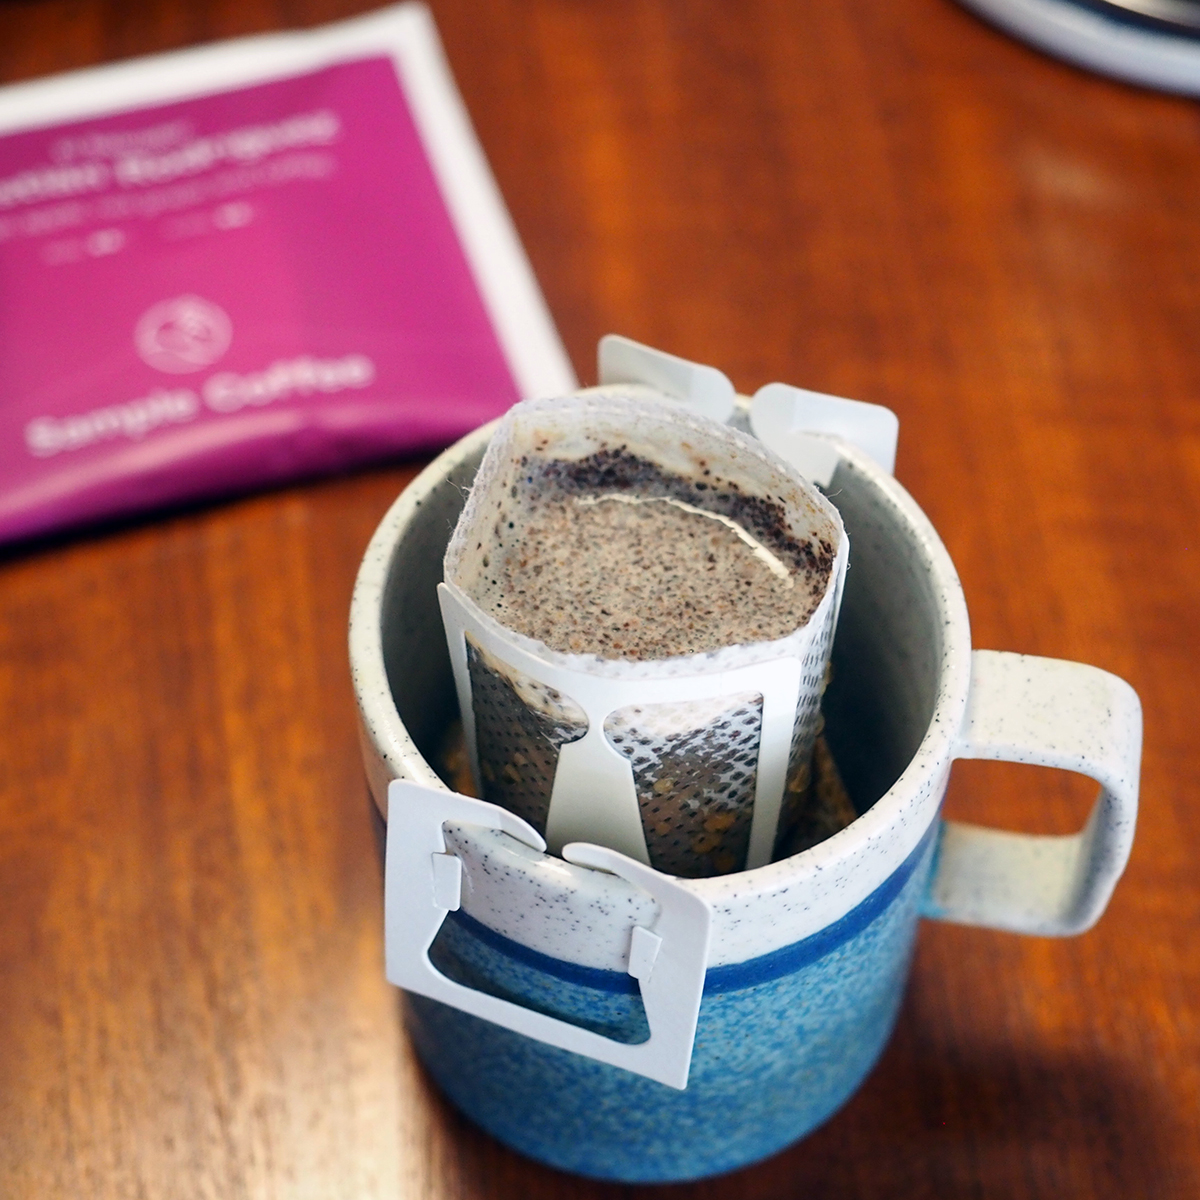 A cup brewing a coffee steeped bag.